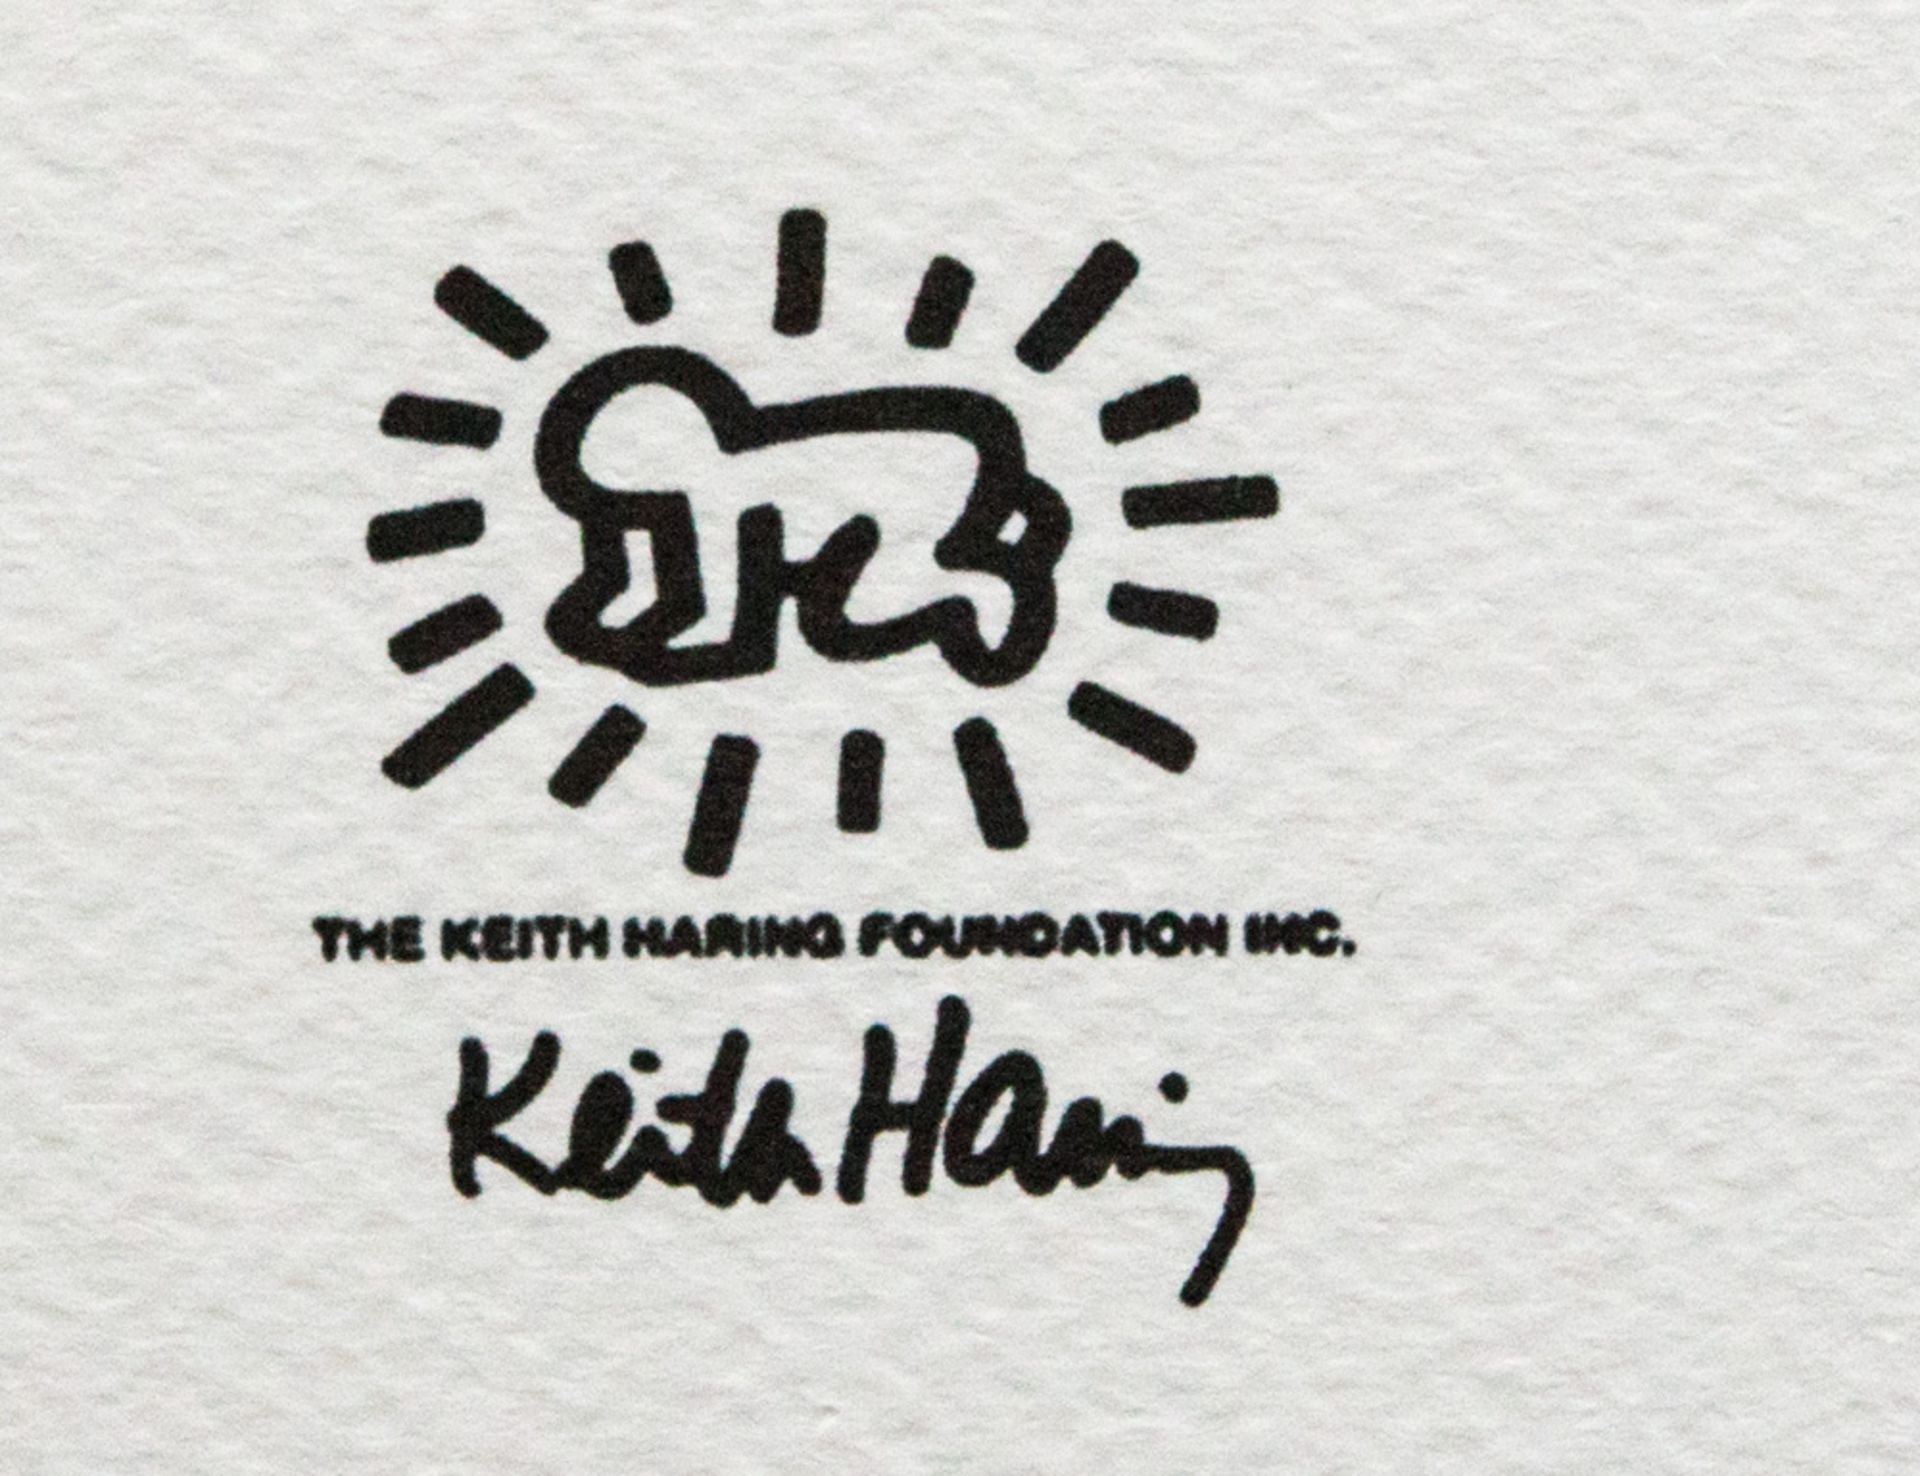 Keith Haring 'Pop Shop' - Image 5 of 6